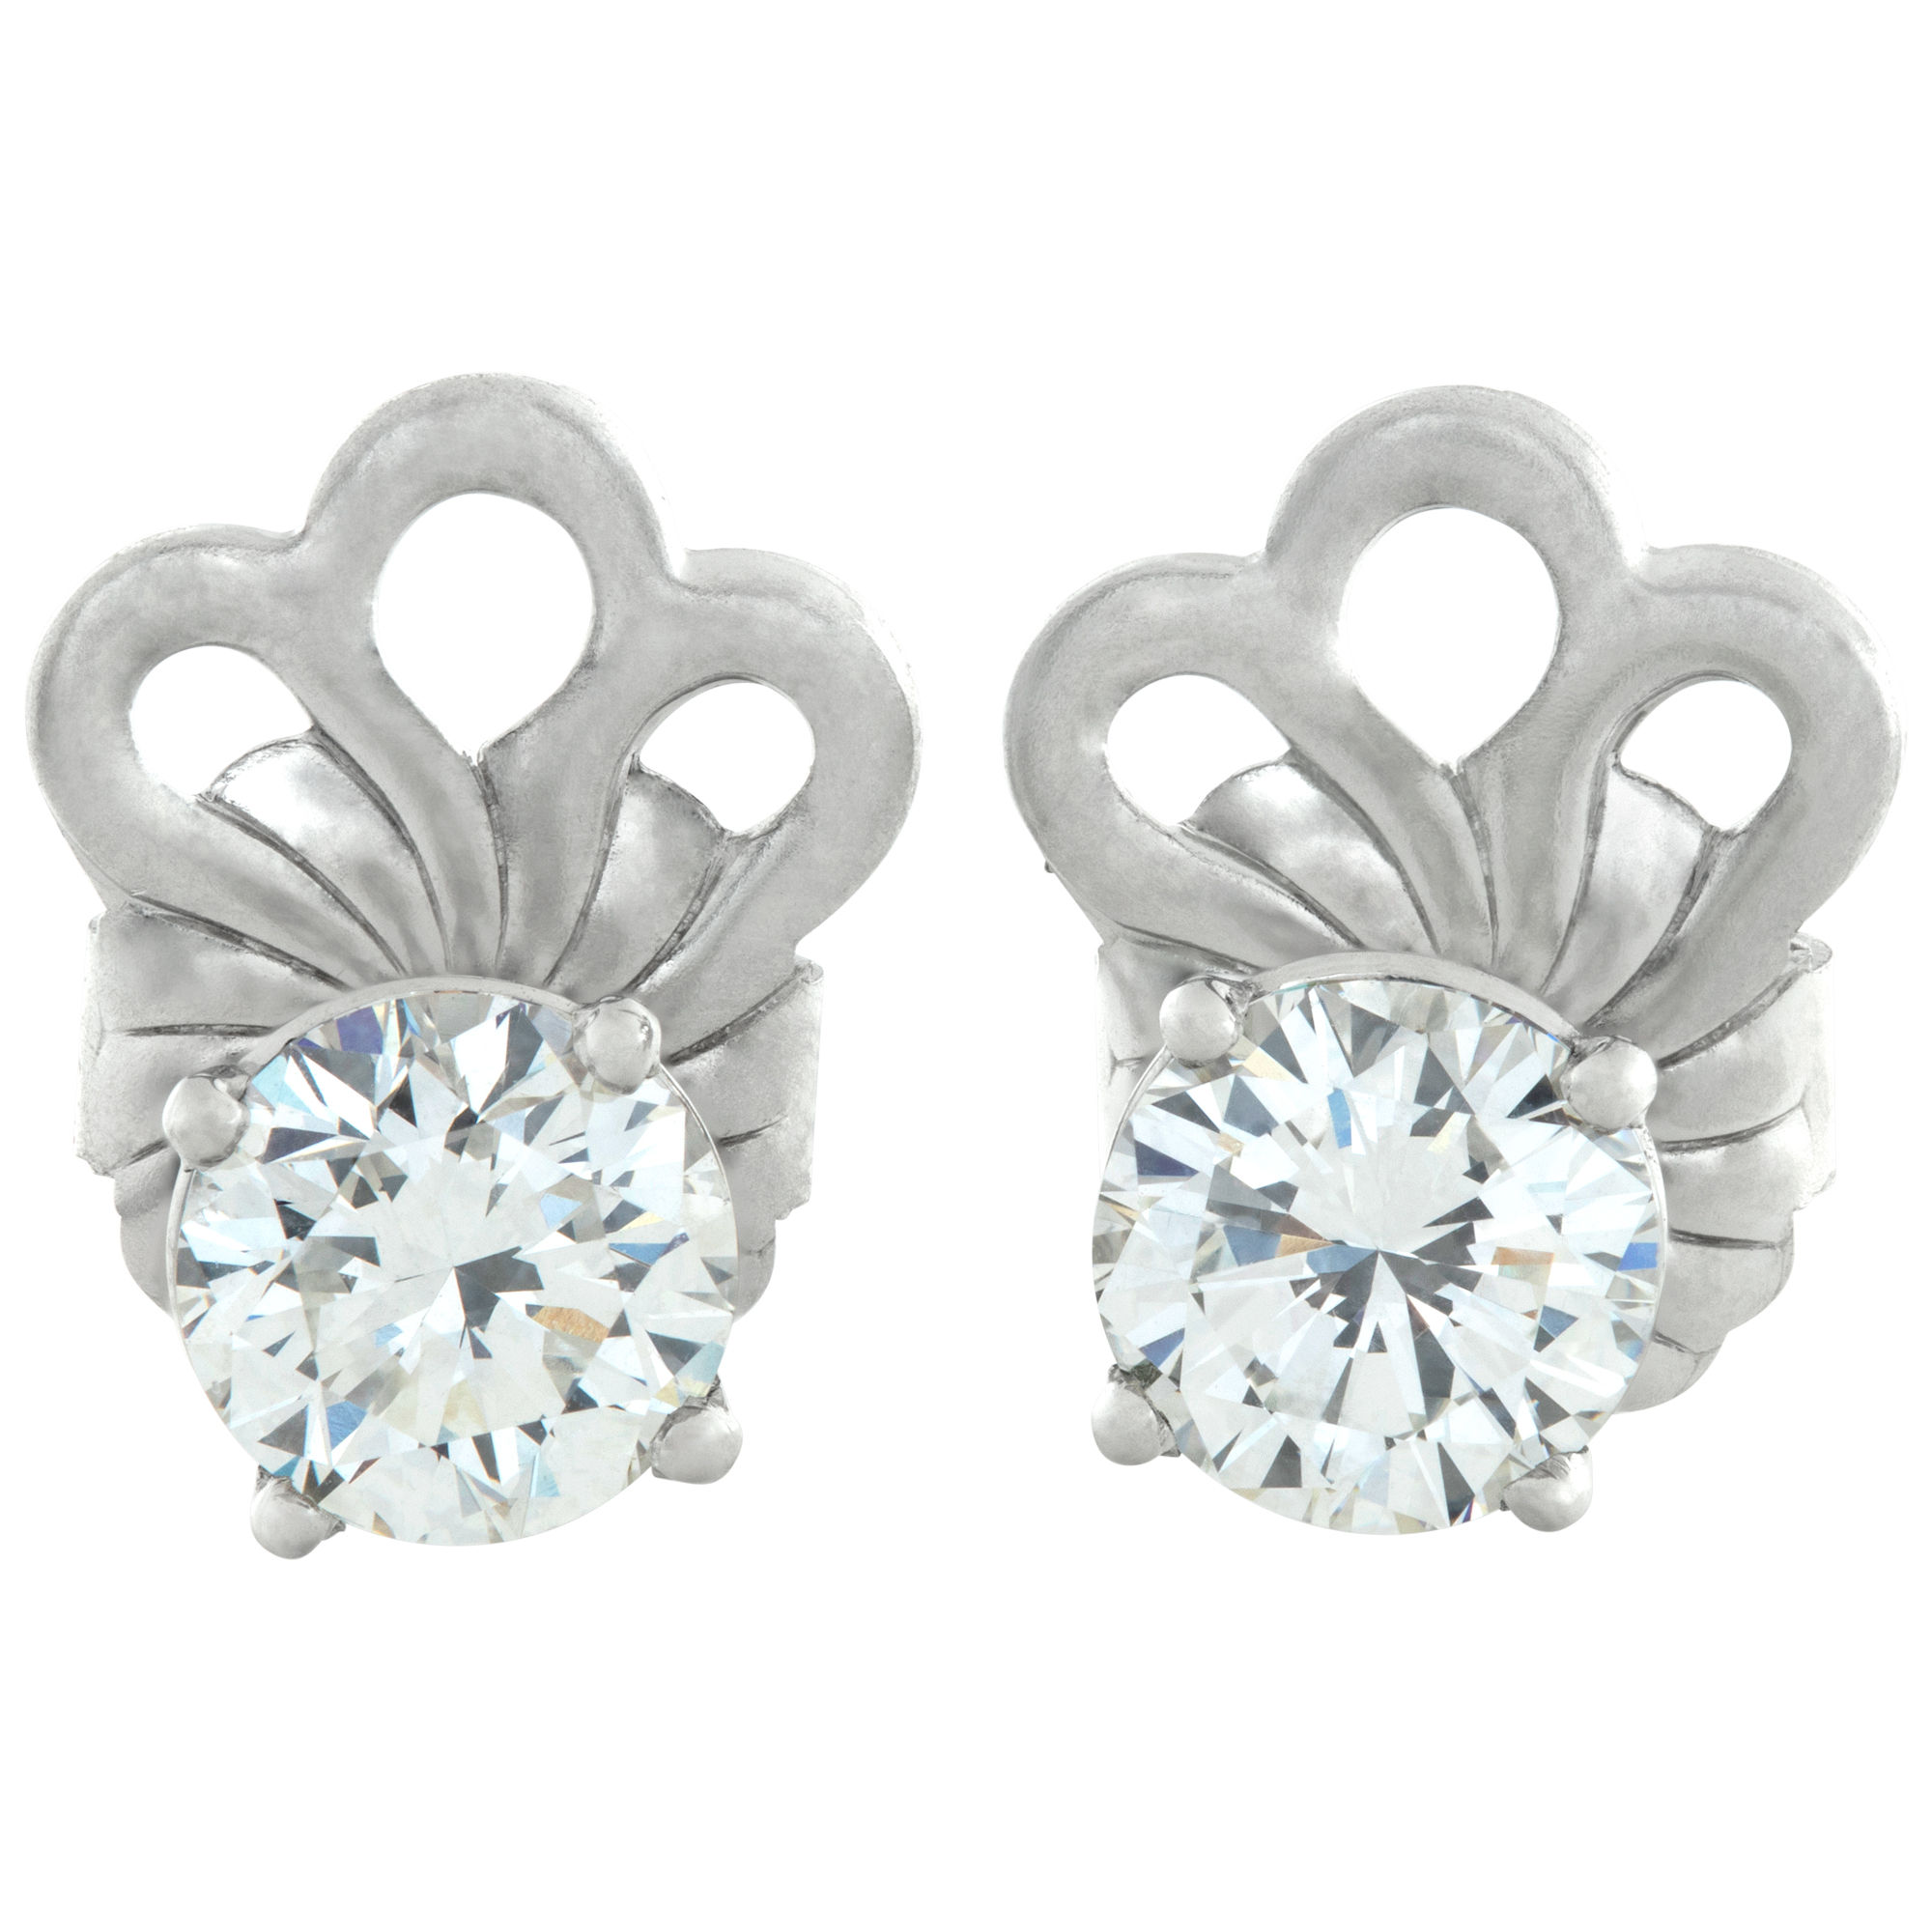 GIA certified round brilliant cut diamond studs 1 carat (G color, SI1 clarity) and 0.98 carat (G color, VS1 clarity) image 1